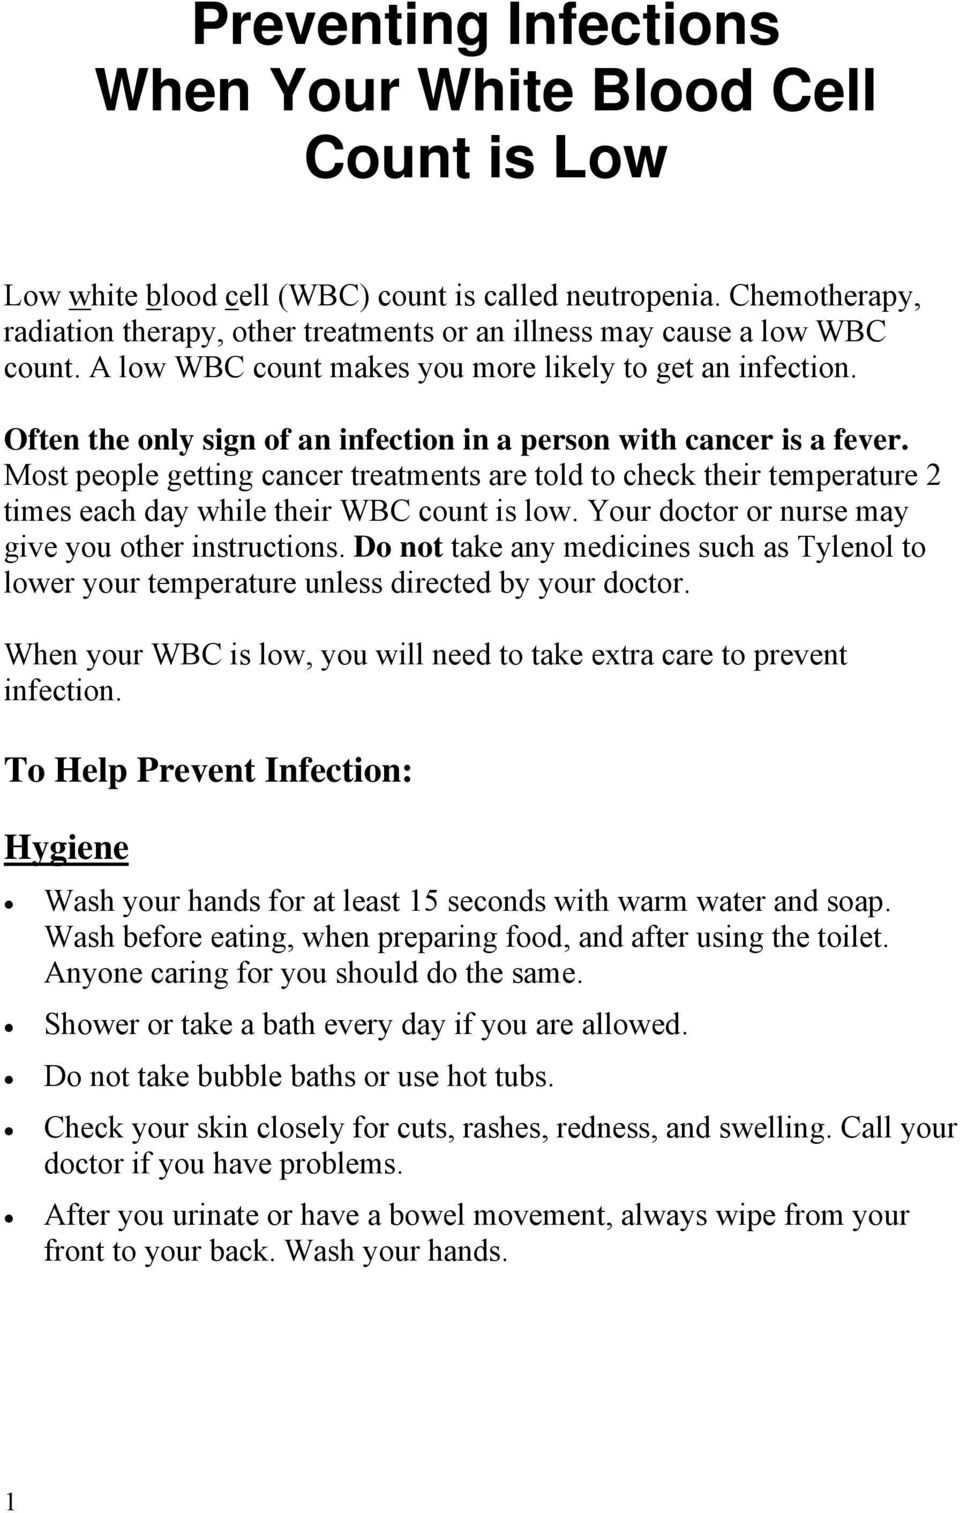 Often the only sign of an infection in a person with cancer is a fever. Most people getting cancer treatments are told to check their temperature 2 times each day while their WBC count is low.